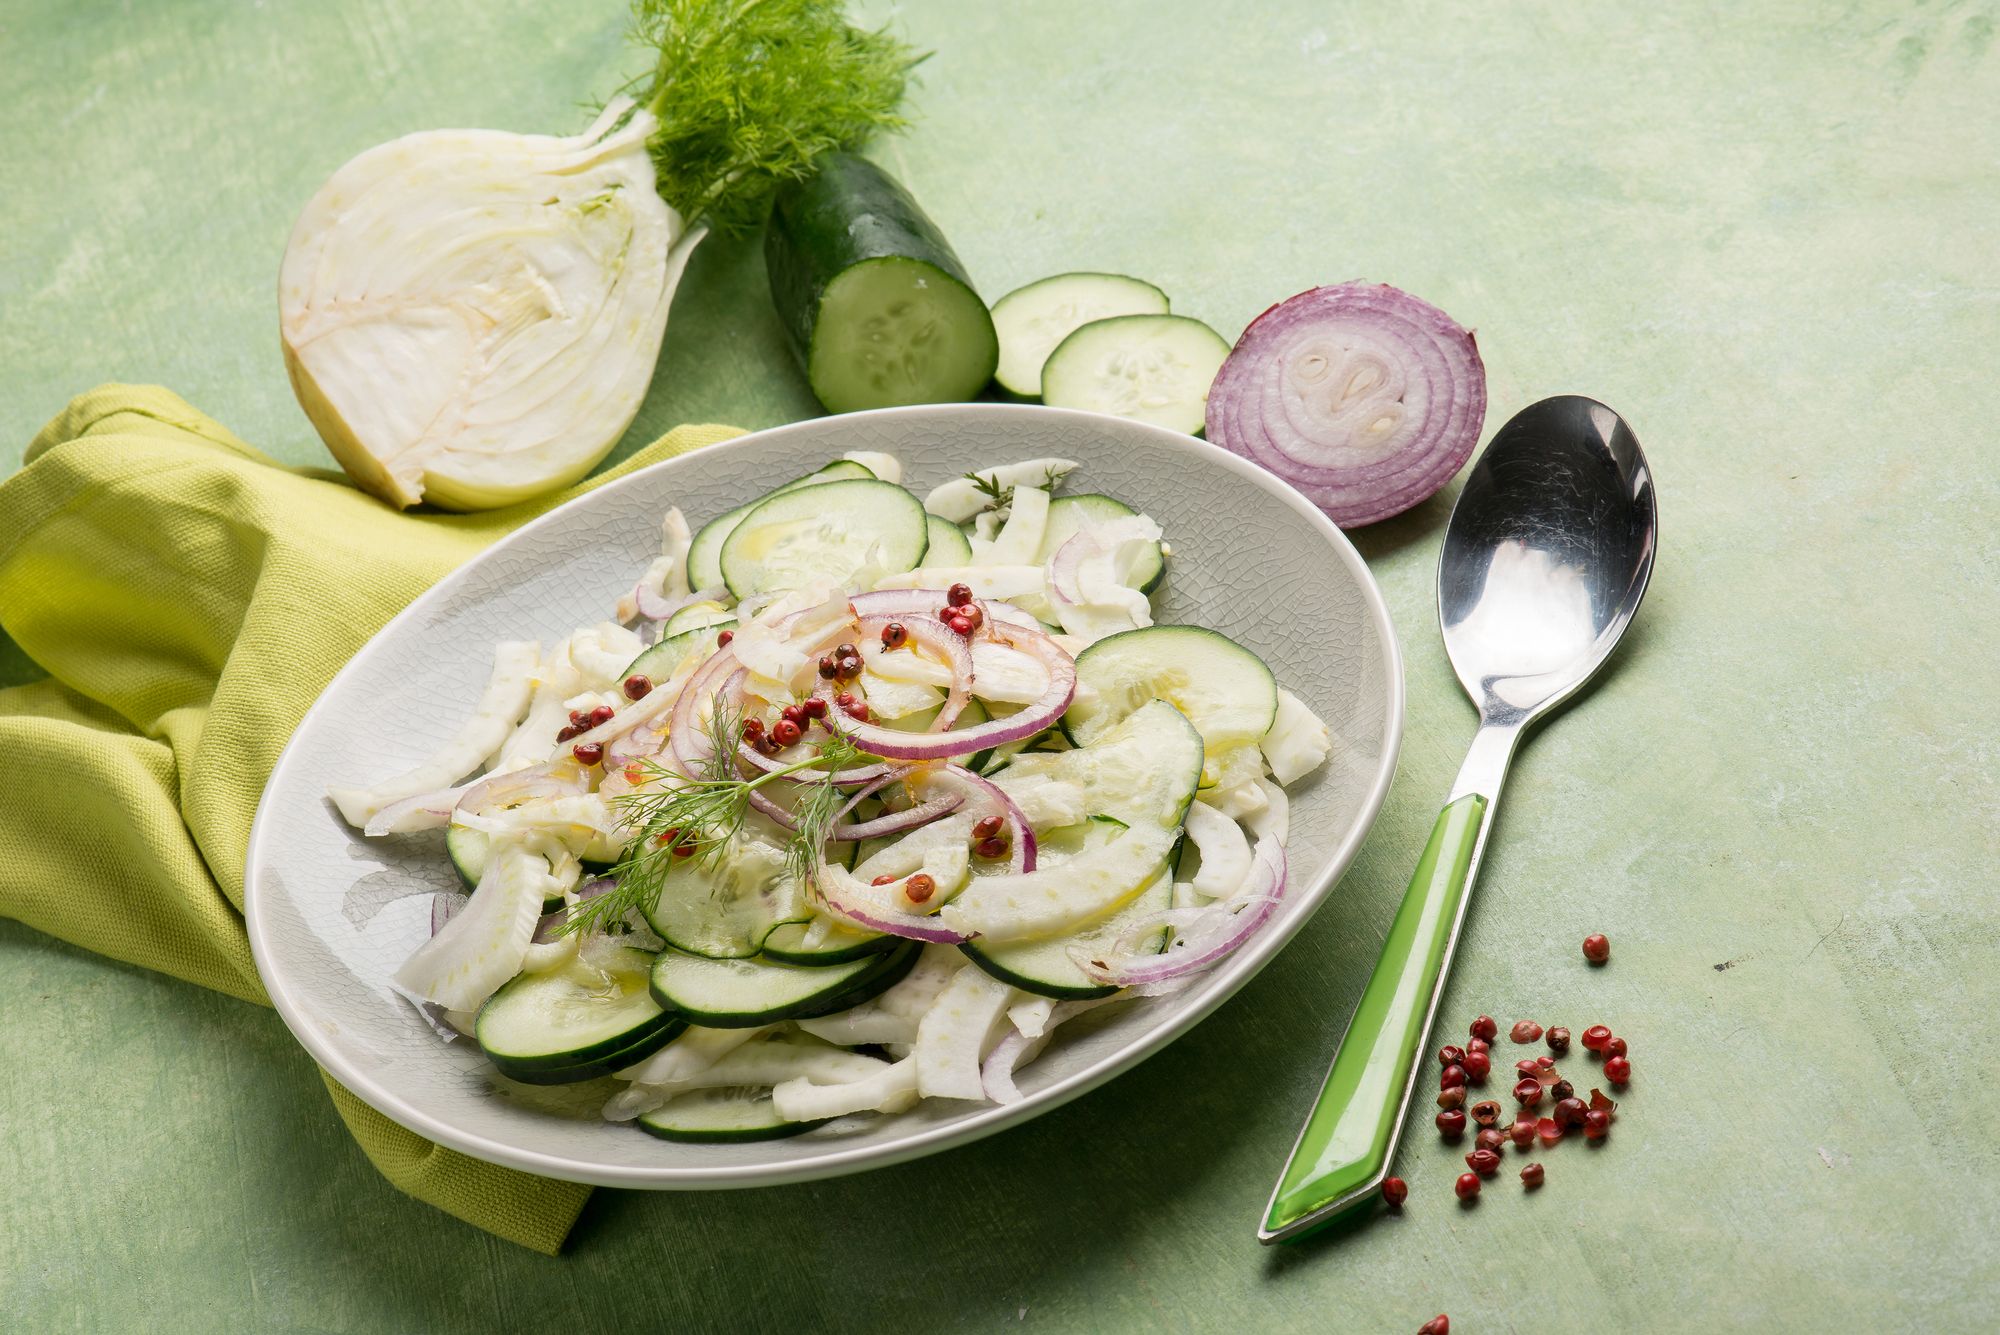 Fennel and Herb Salad